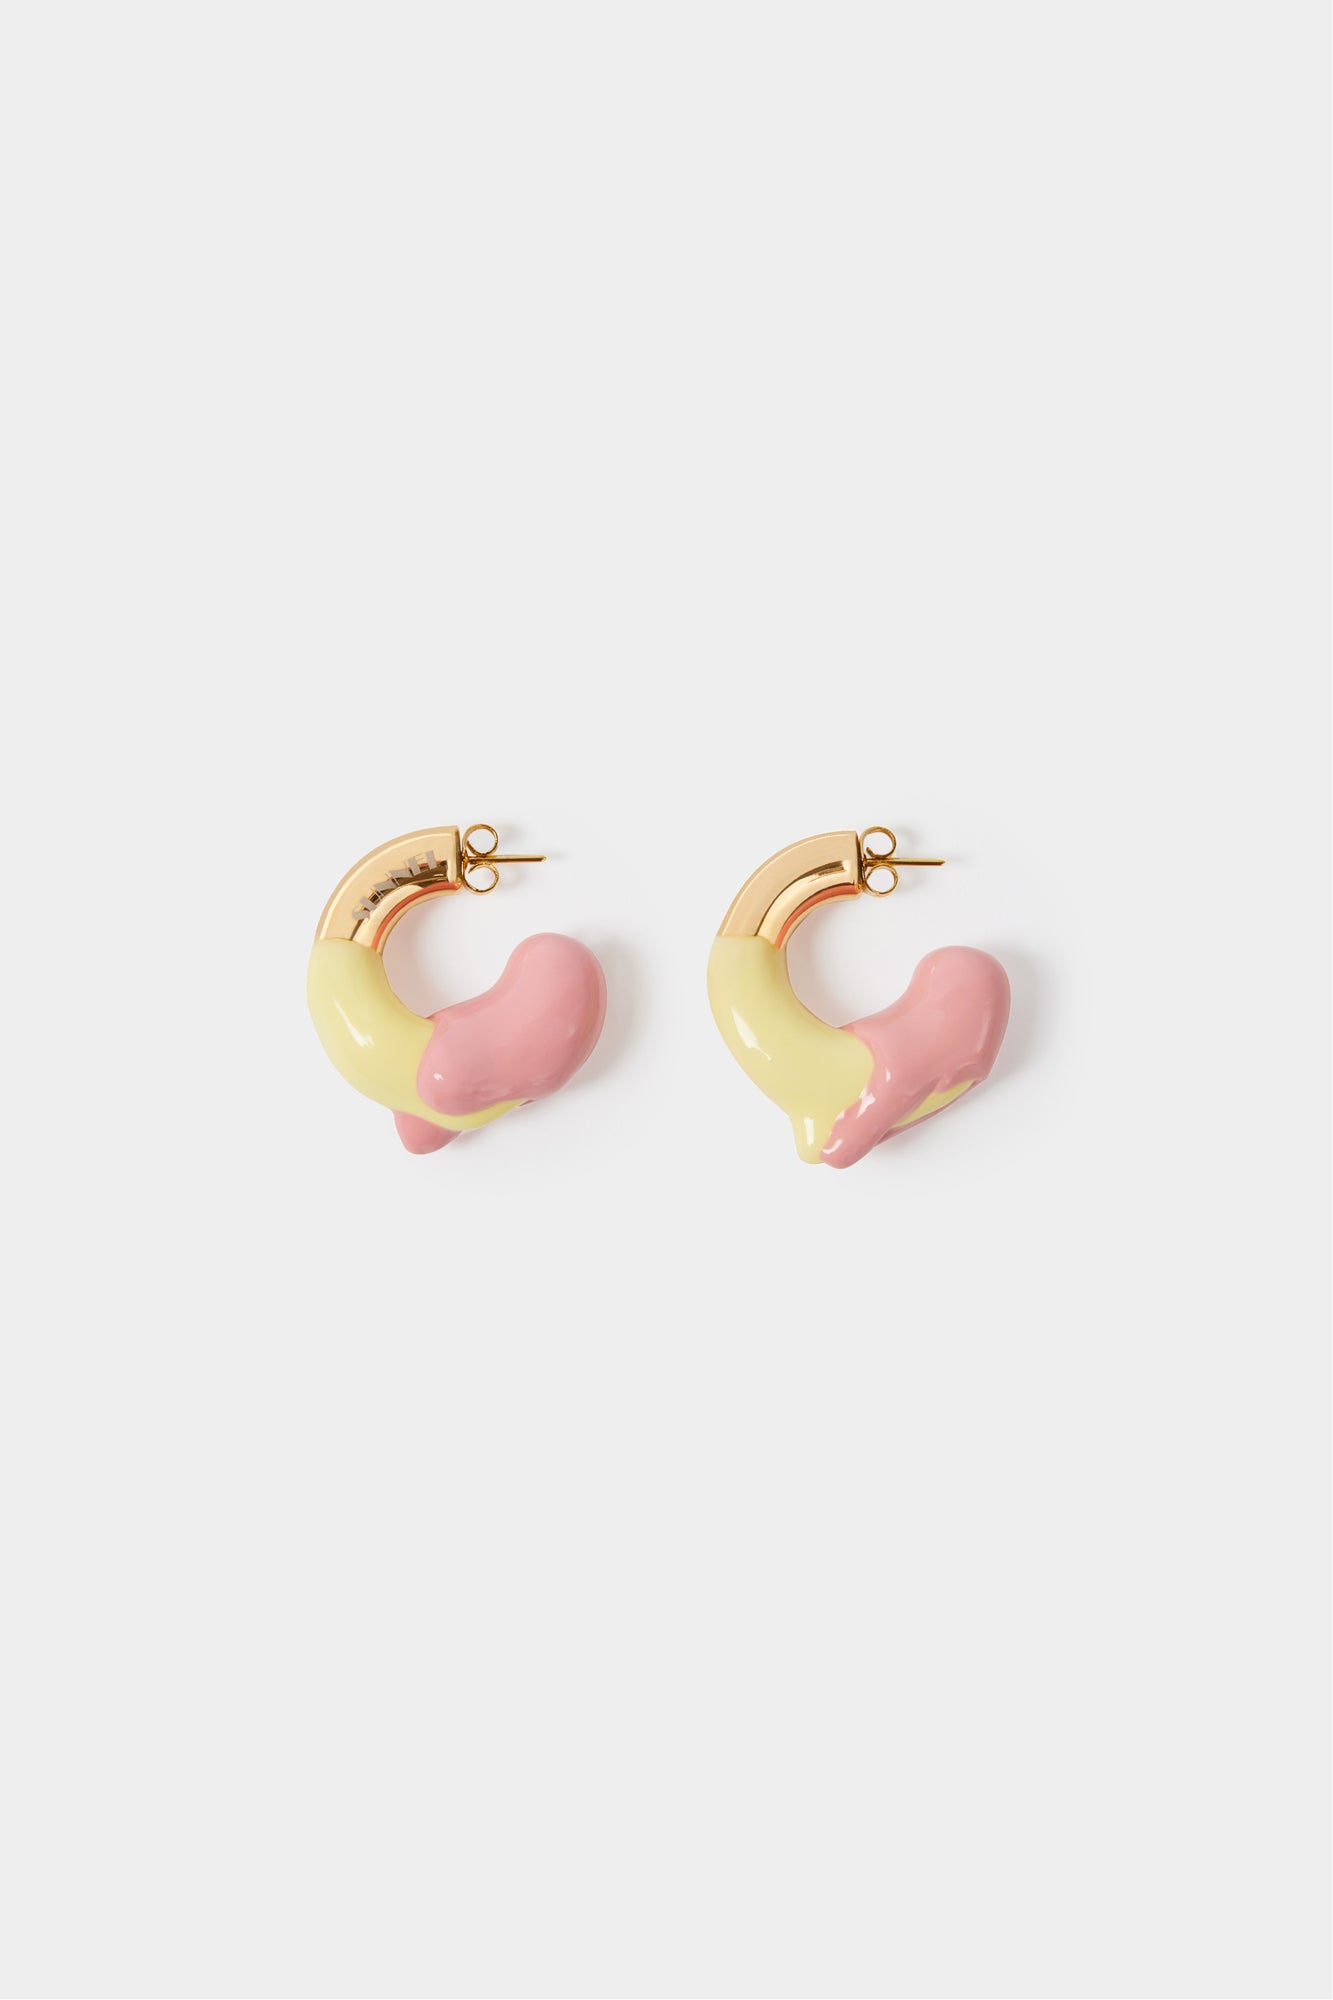 SMALL RUBBERIZED EARRINGS GOLD / pink & light yellow